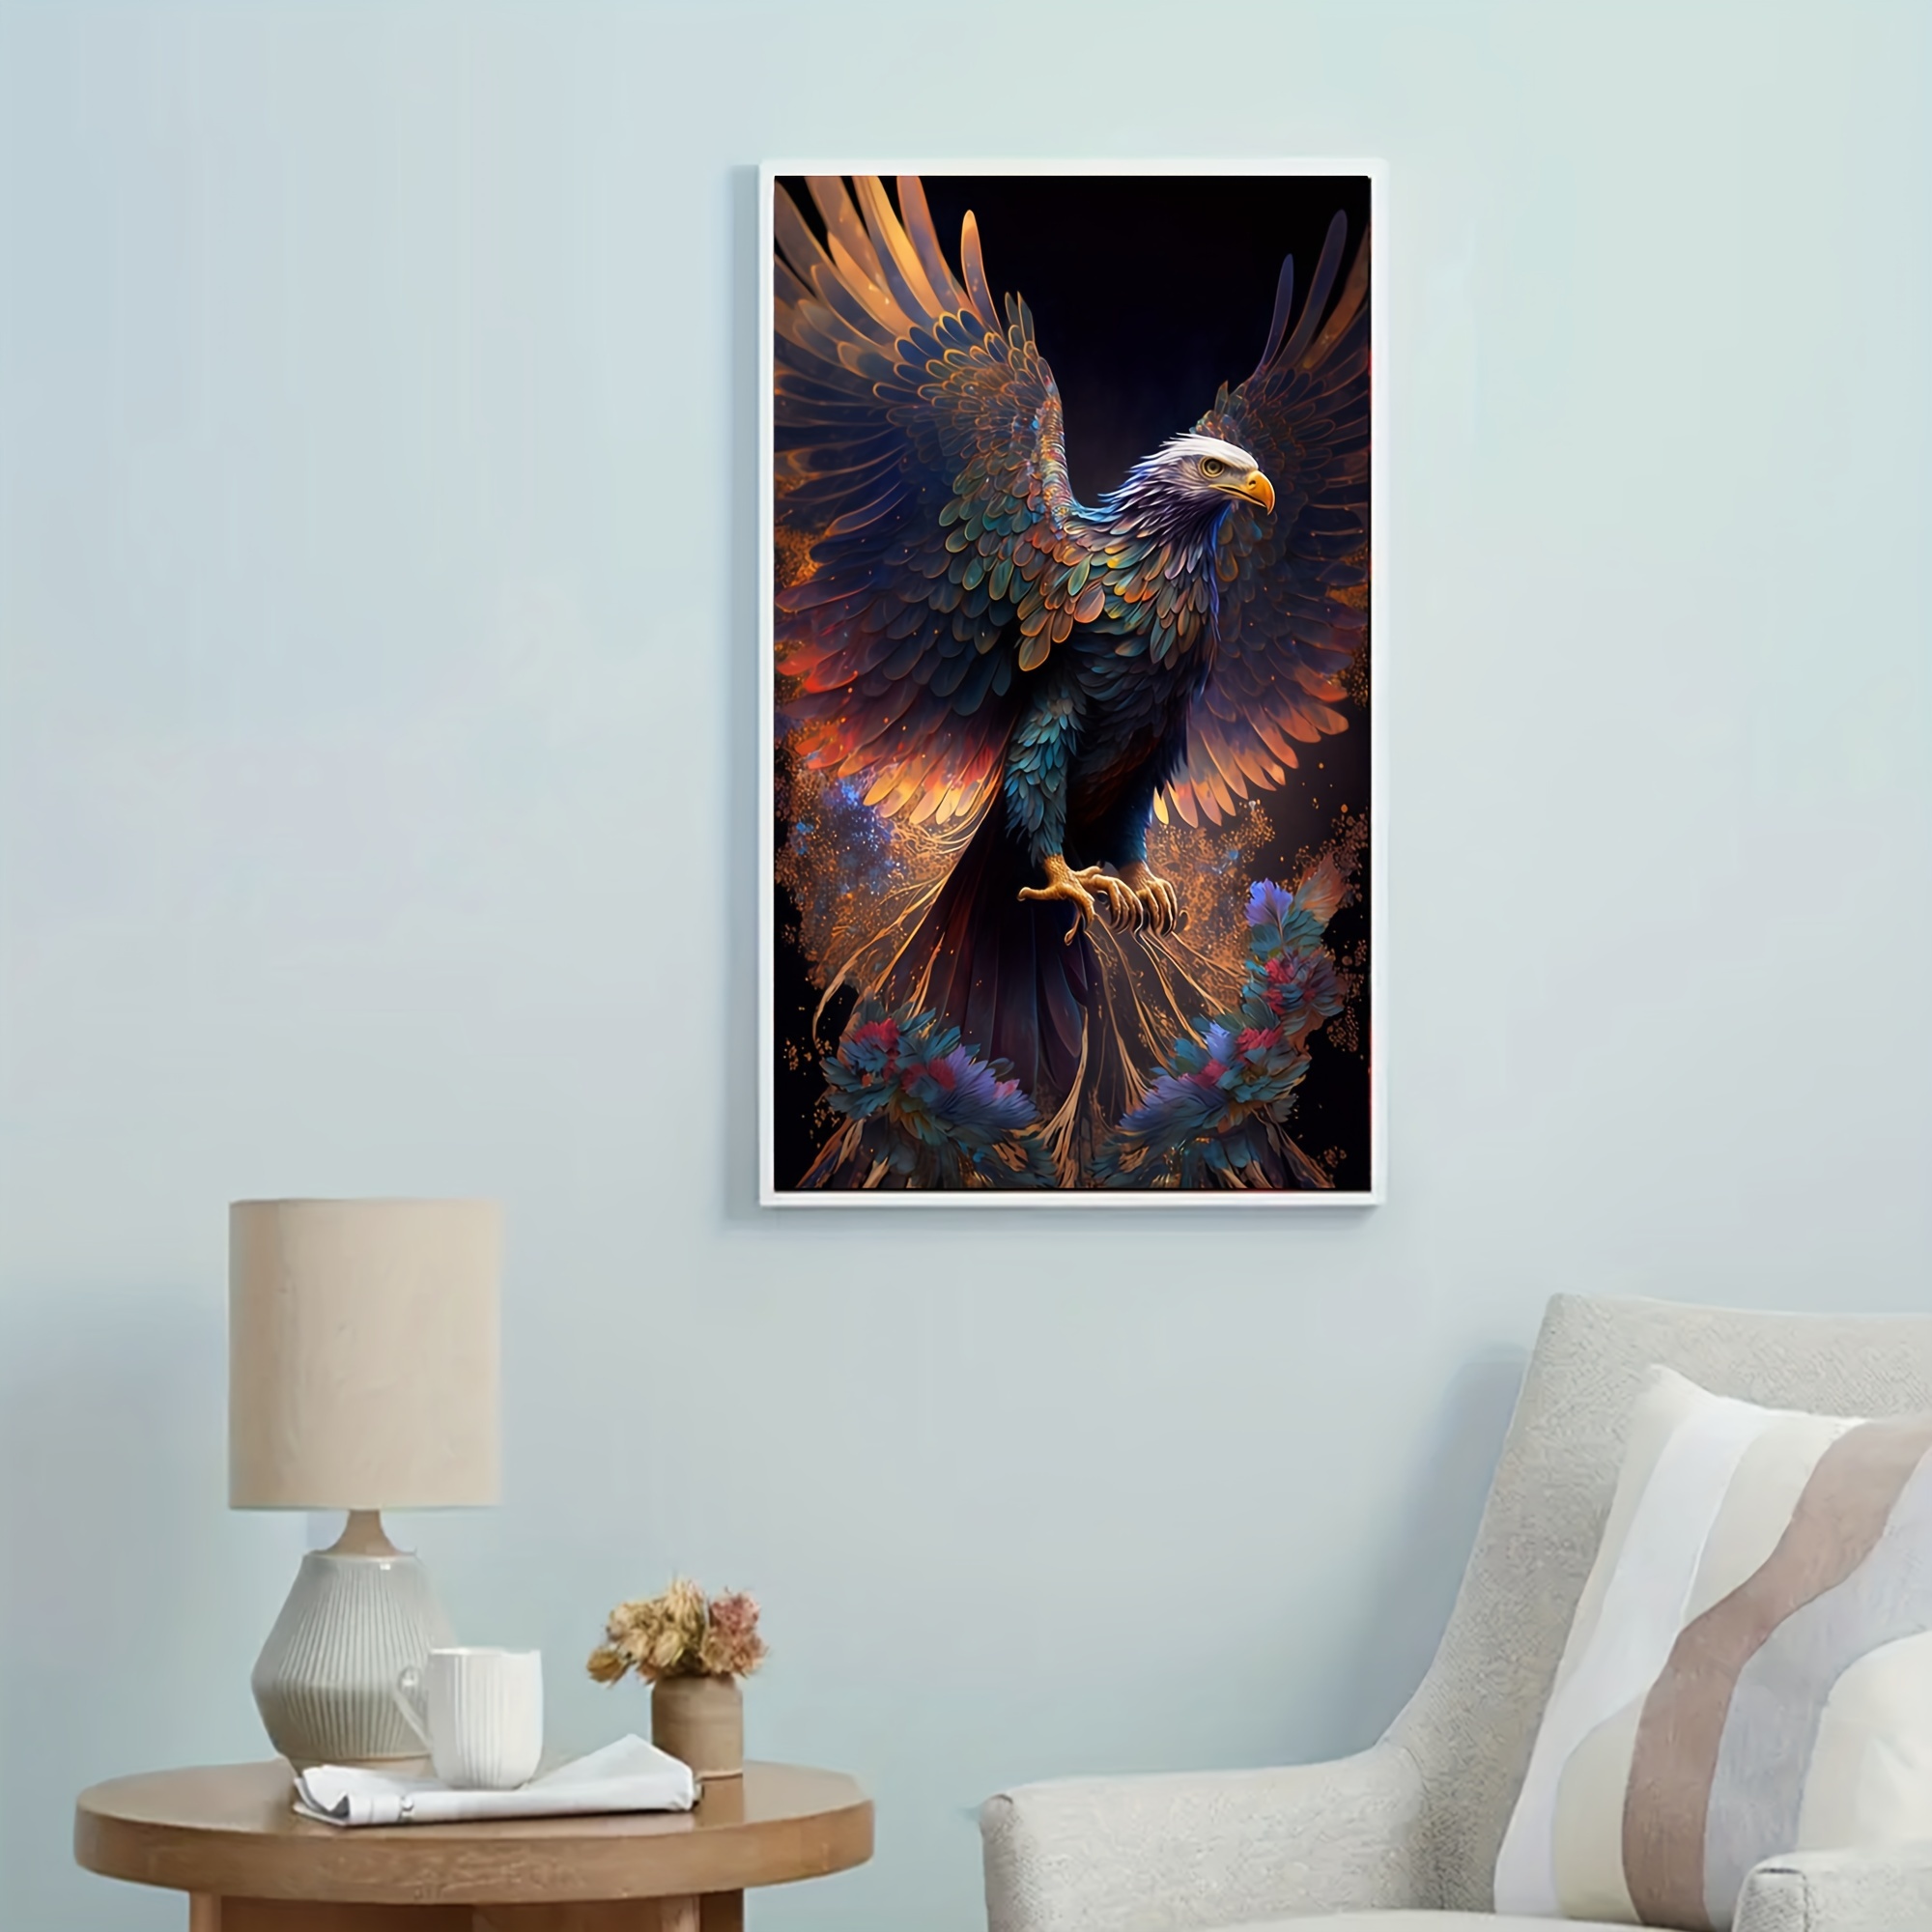 1pc large size eagle pattern diamond art painting kit 5d diy mosaic round diamond coating water drill art painting holiday gift handmade craft production suitable for home wall decoration art frameless 50x100cm 19 7x39 4inch